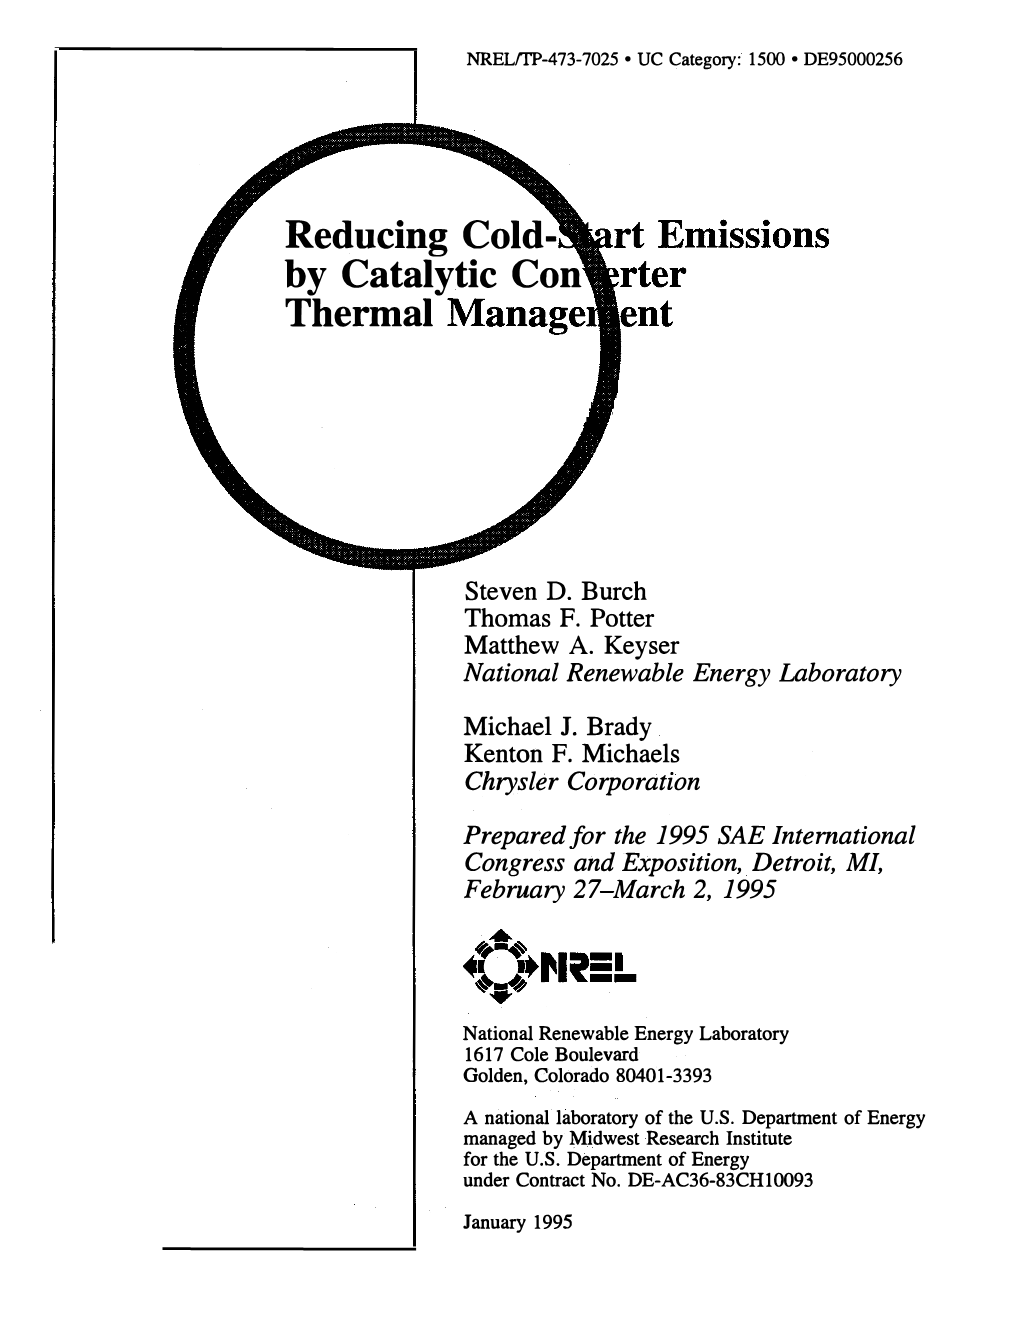 Reducing Cold-Start Emissions by Catalytic Converter Thermal Management